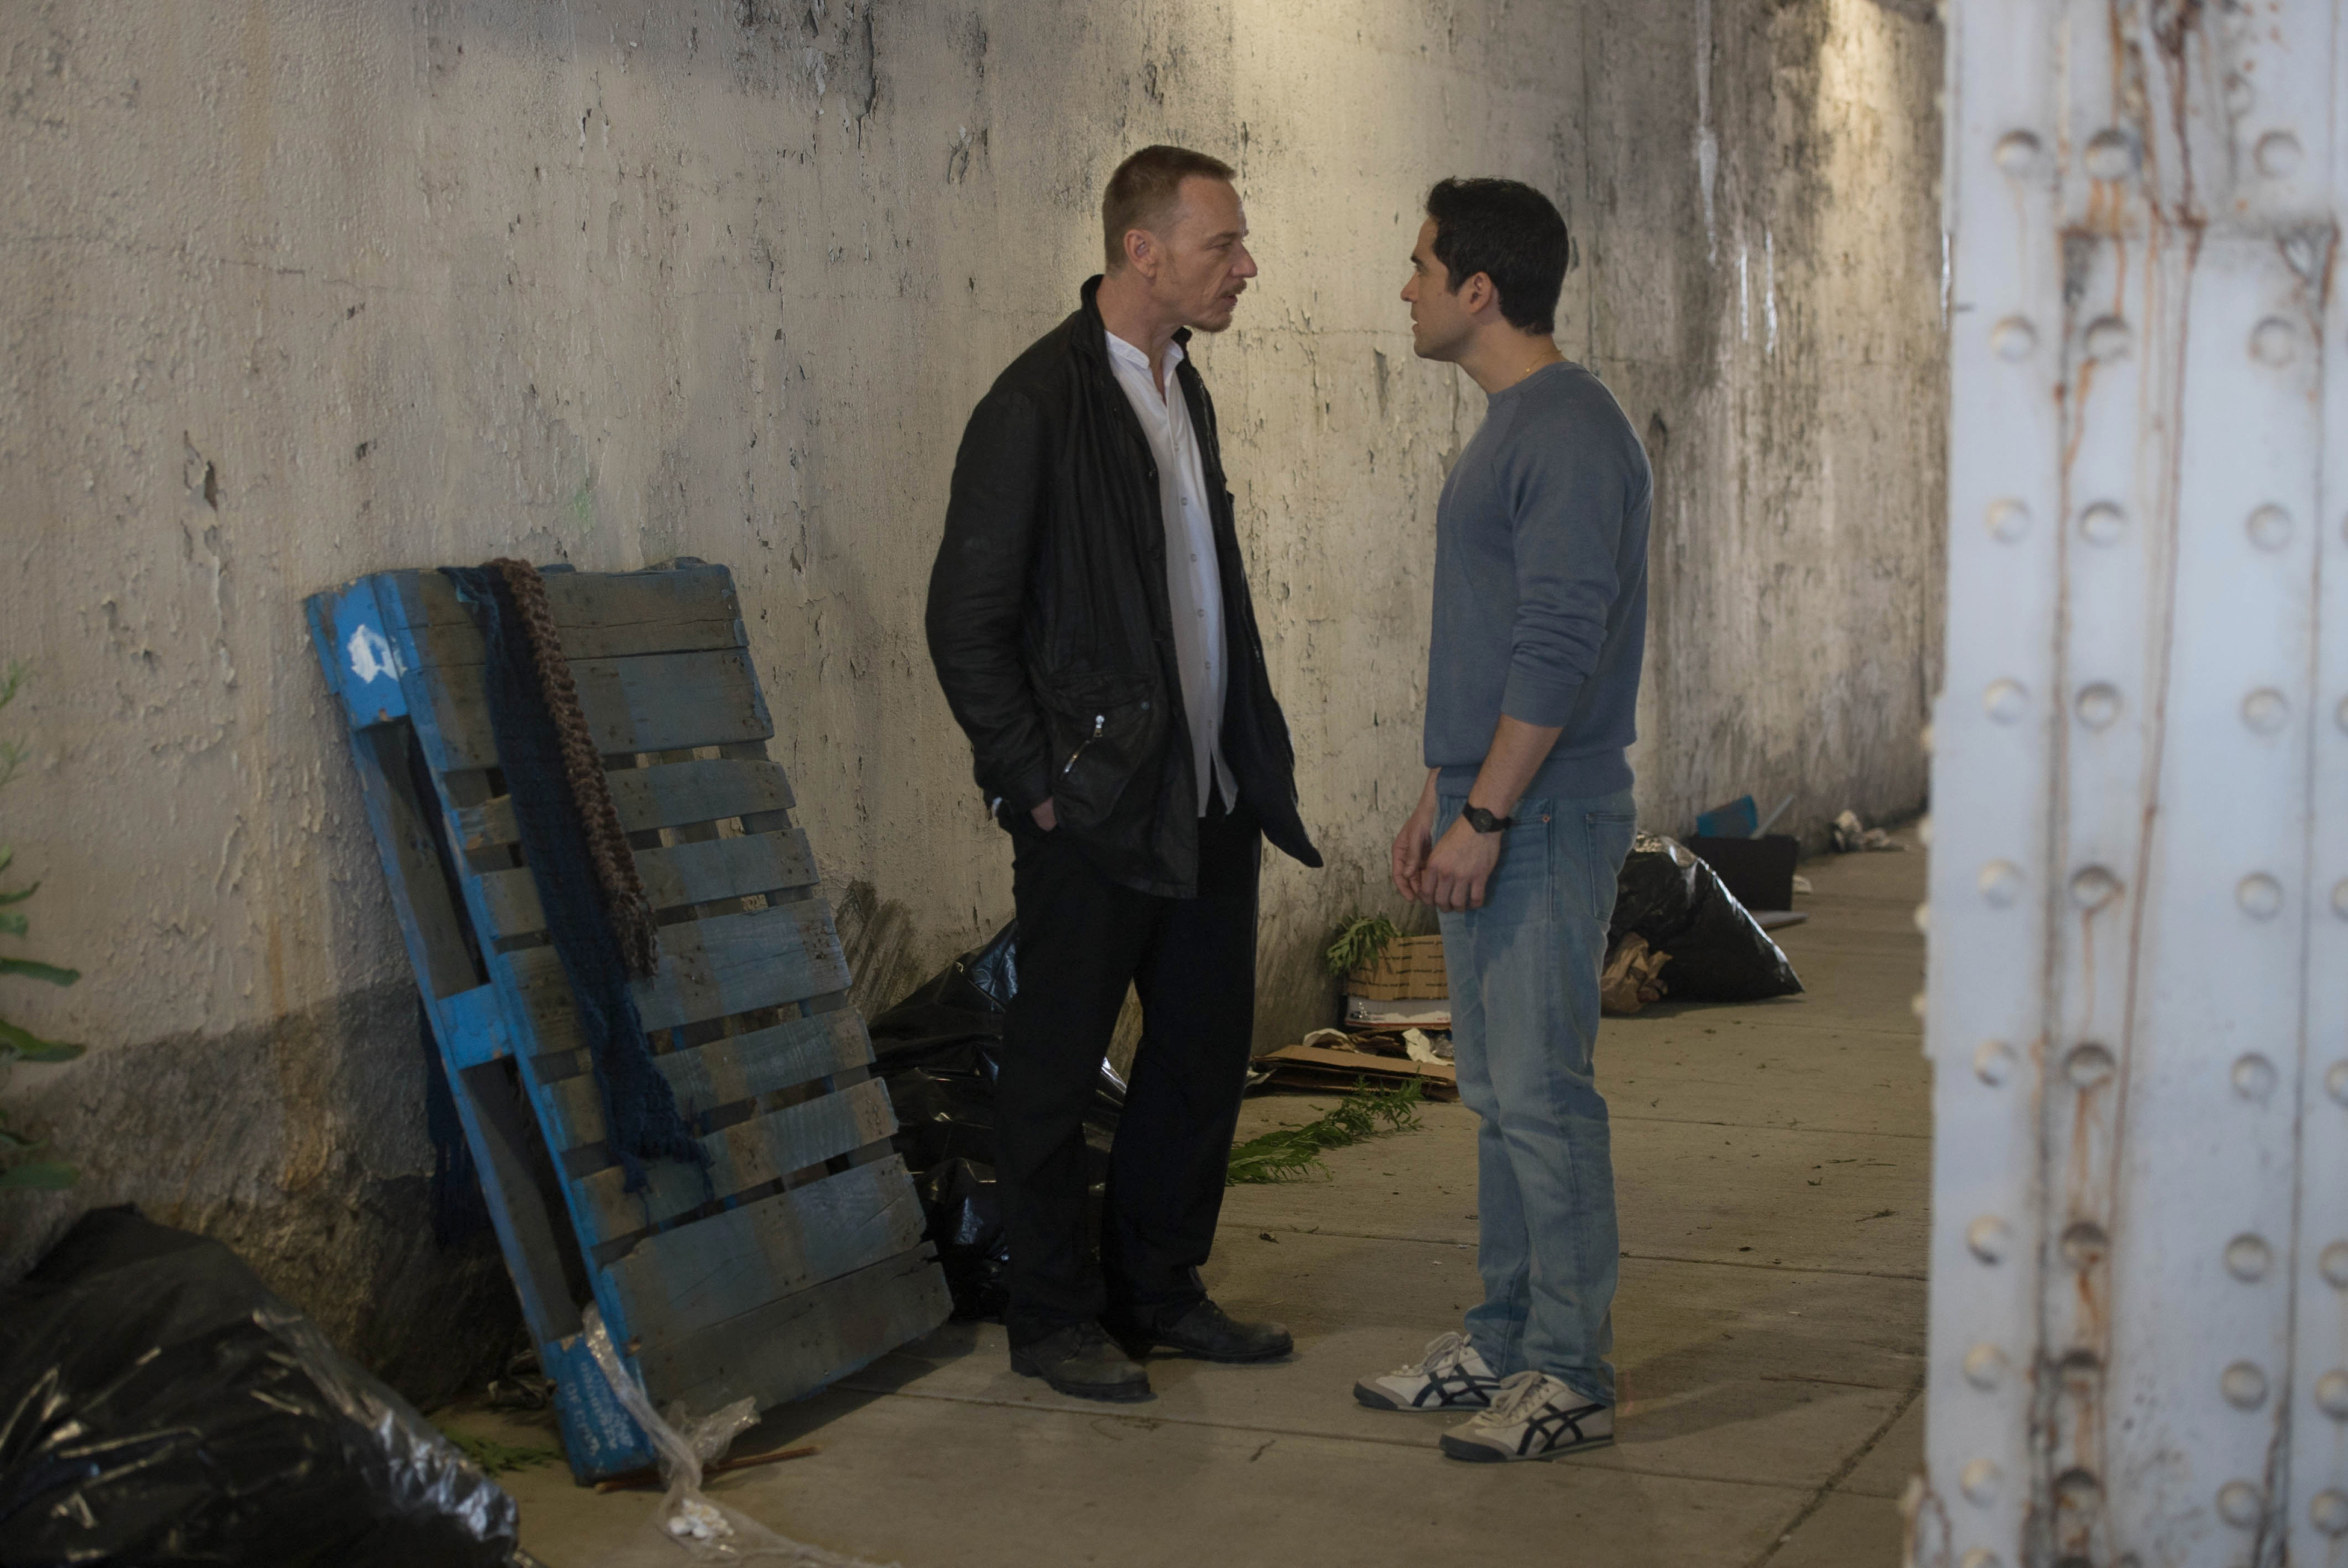 THE EXORCIST: L-R: Ben Daniels and Alfonso Herrera in the "Lupus in Fabula" episode of THE EXORCIST airing Friday, Sept. 30 (9:00-10:00 PM ET/PT) on FOX. ©2016 Fox Broadcasting Co. Cr: Jean Whiteside/FOX